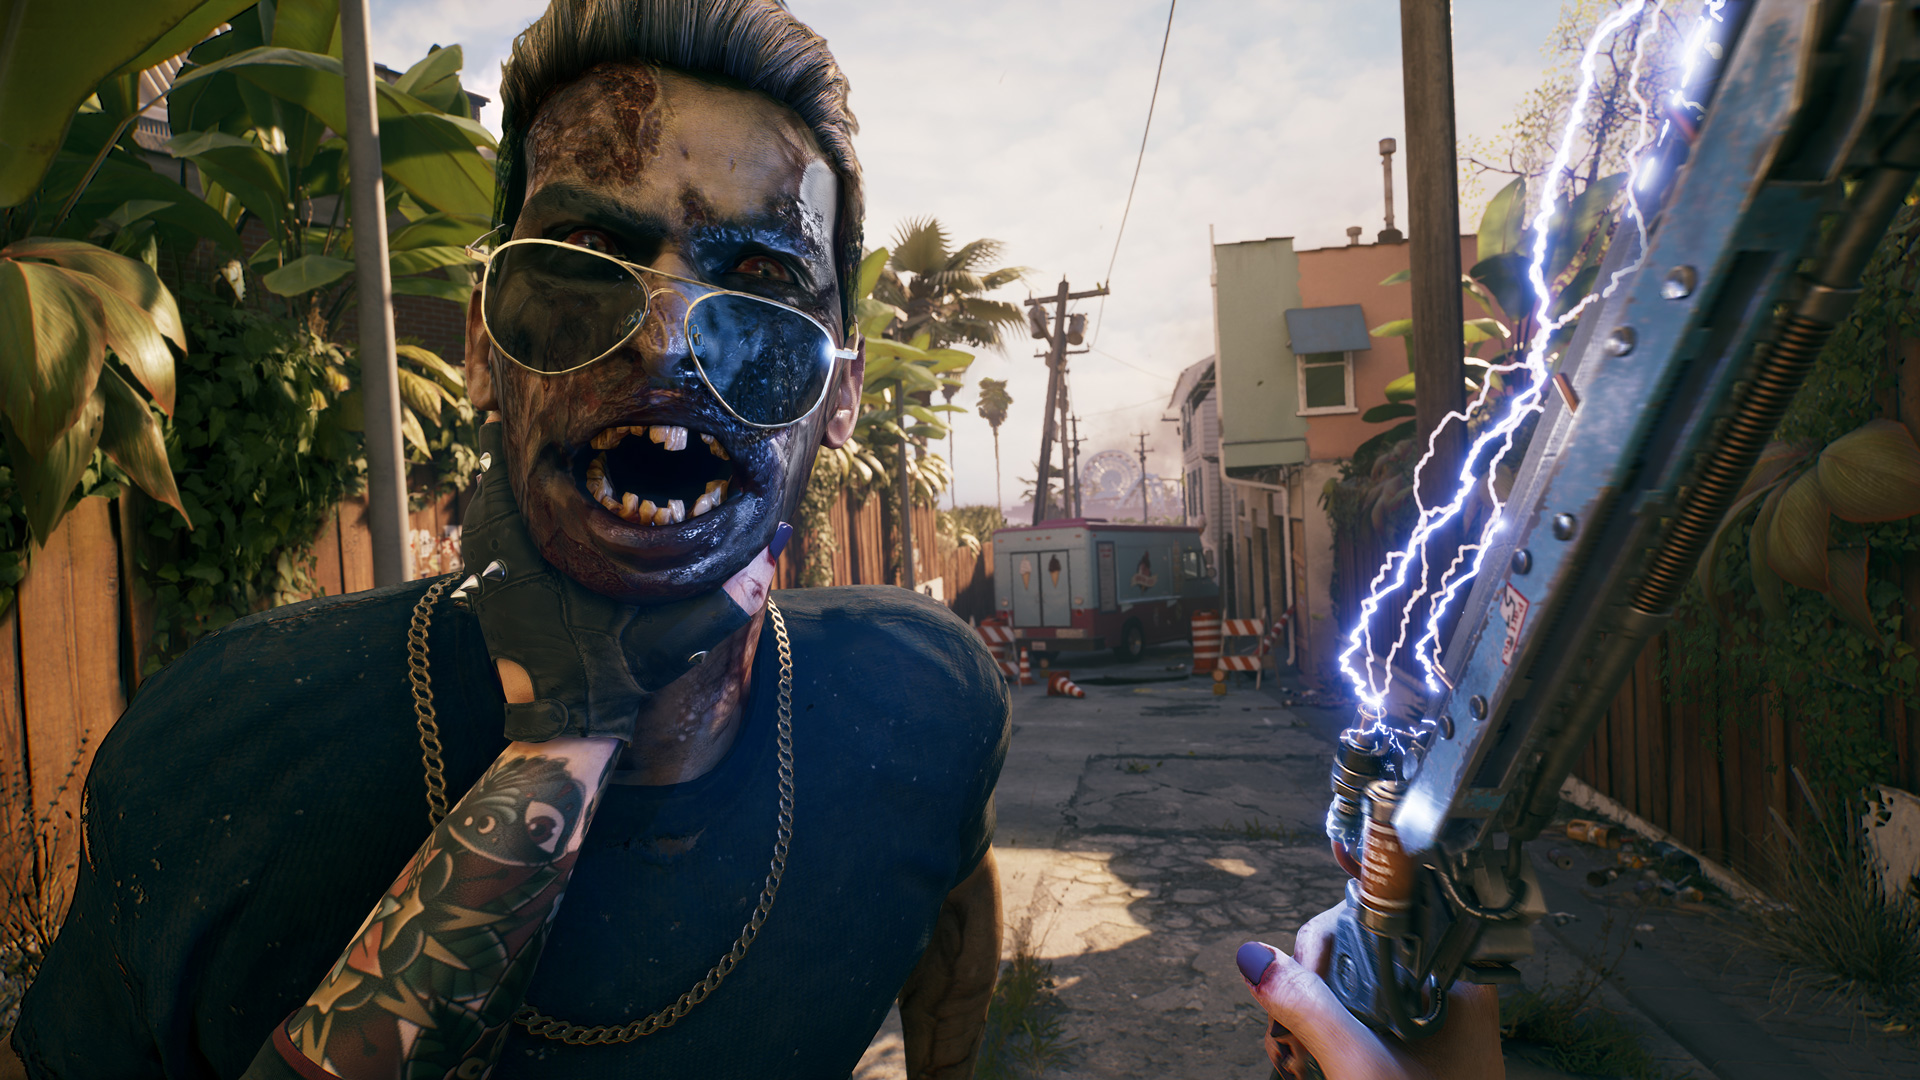 Dead Island 2 Review Roundup - N4G